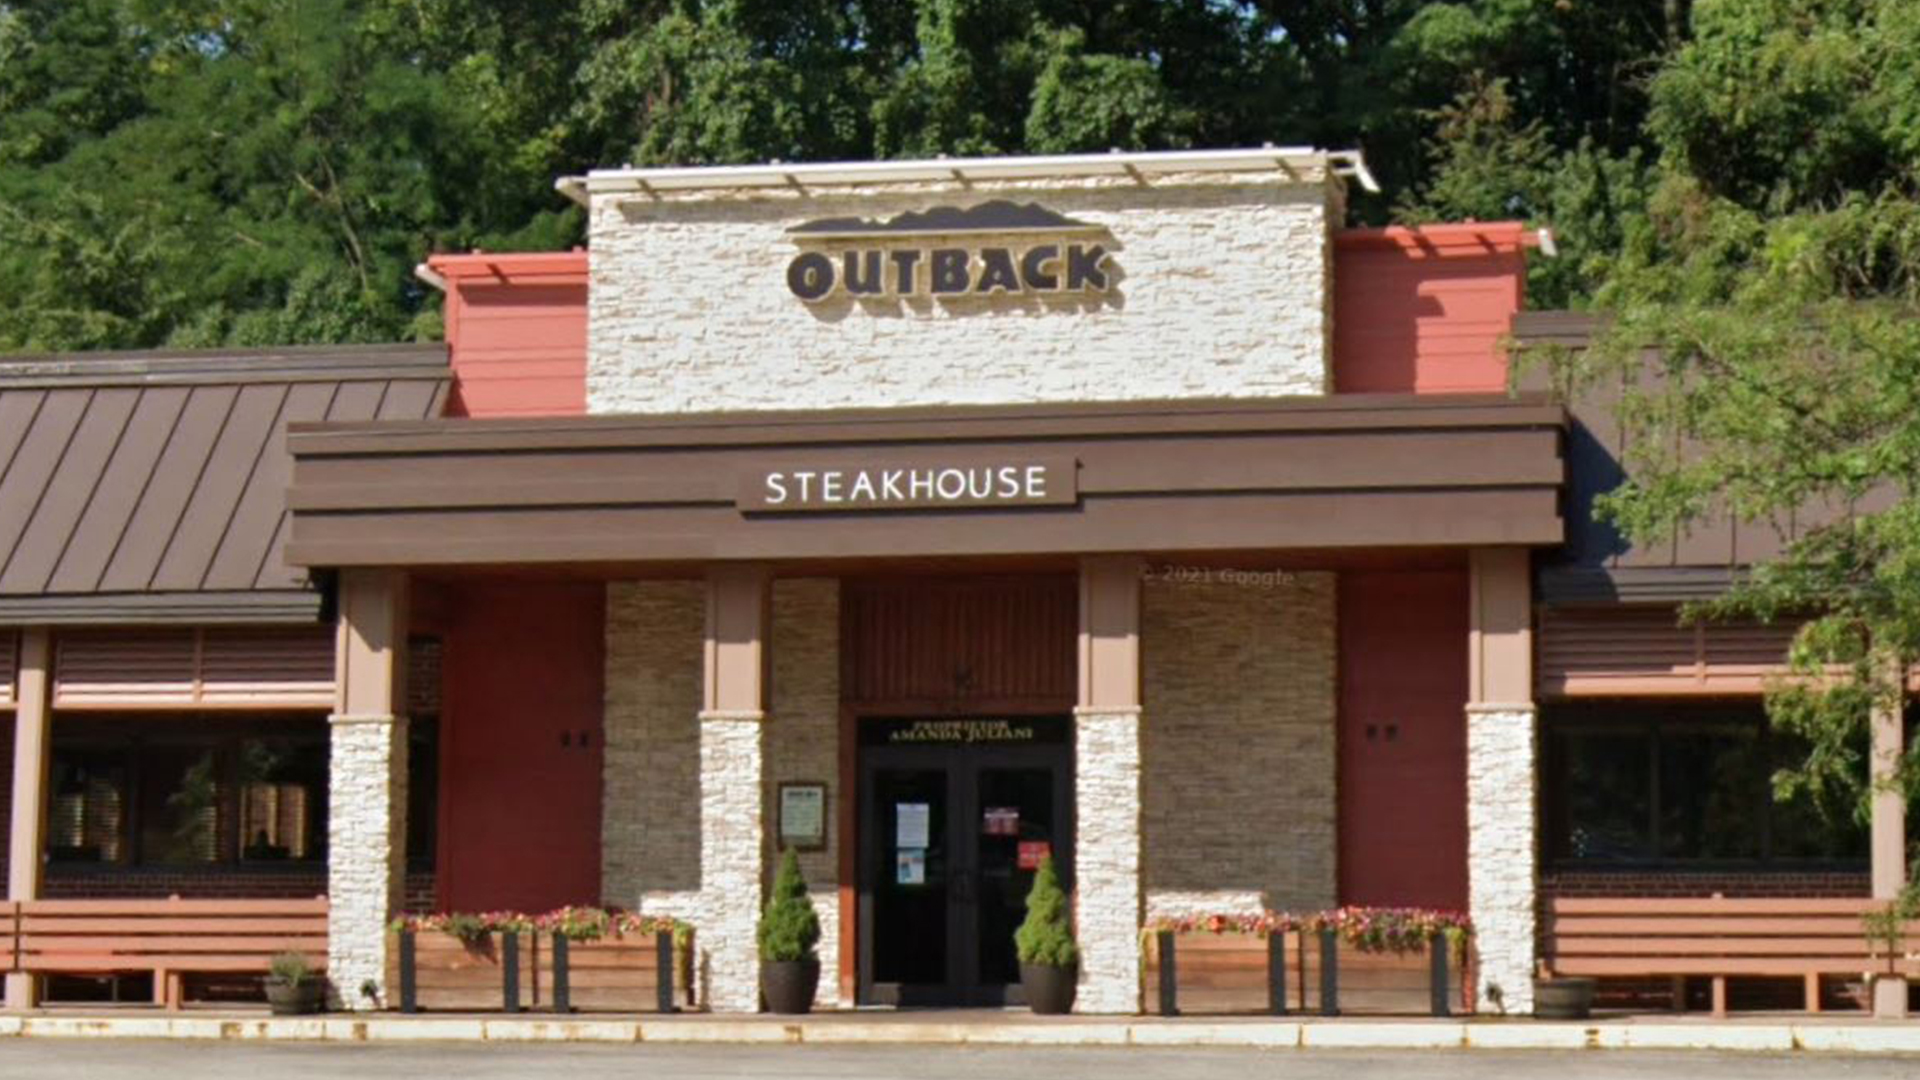 Outback Steakhouse Shuts Down After 27 Years: Massive Closure Includes 41 Restaurants